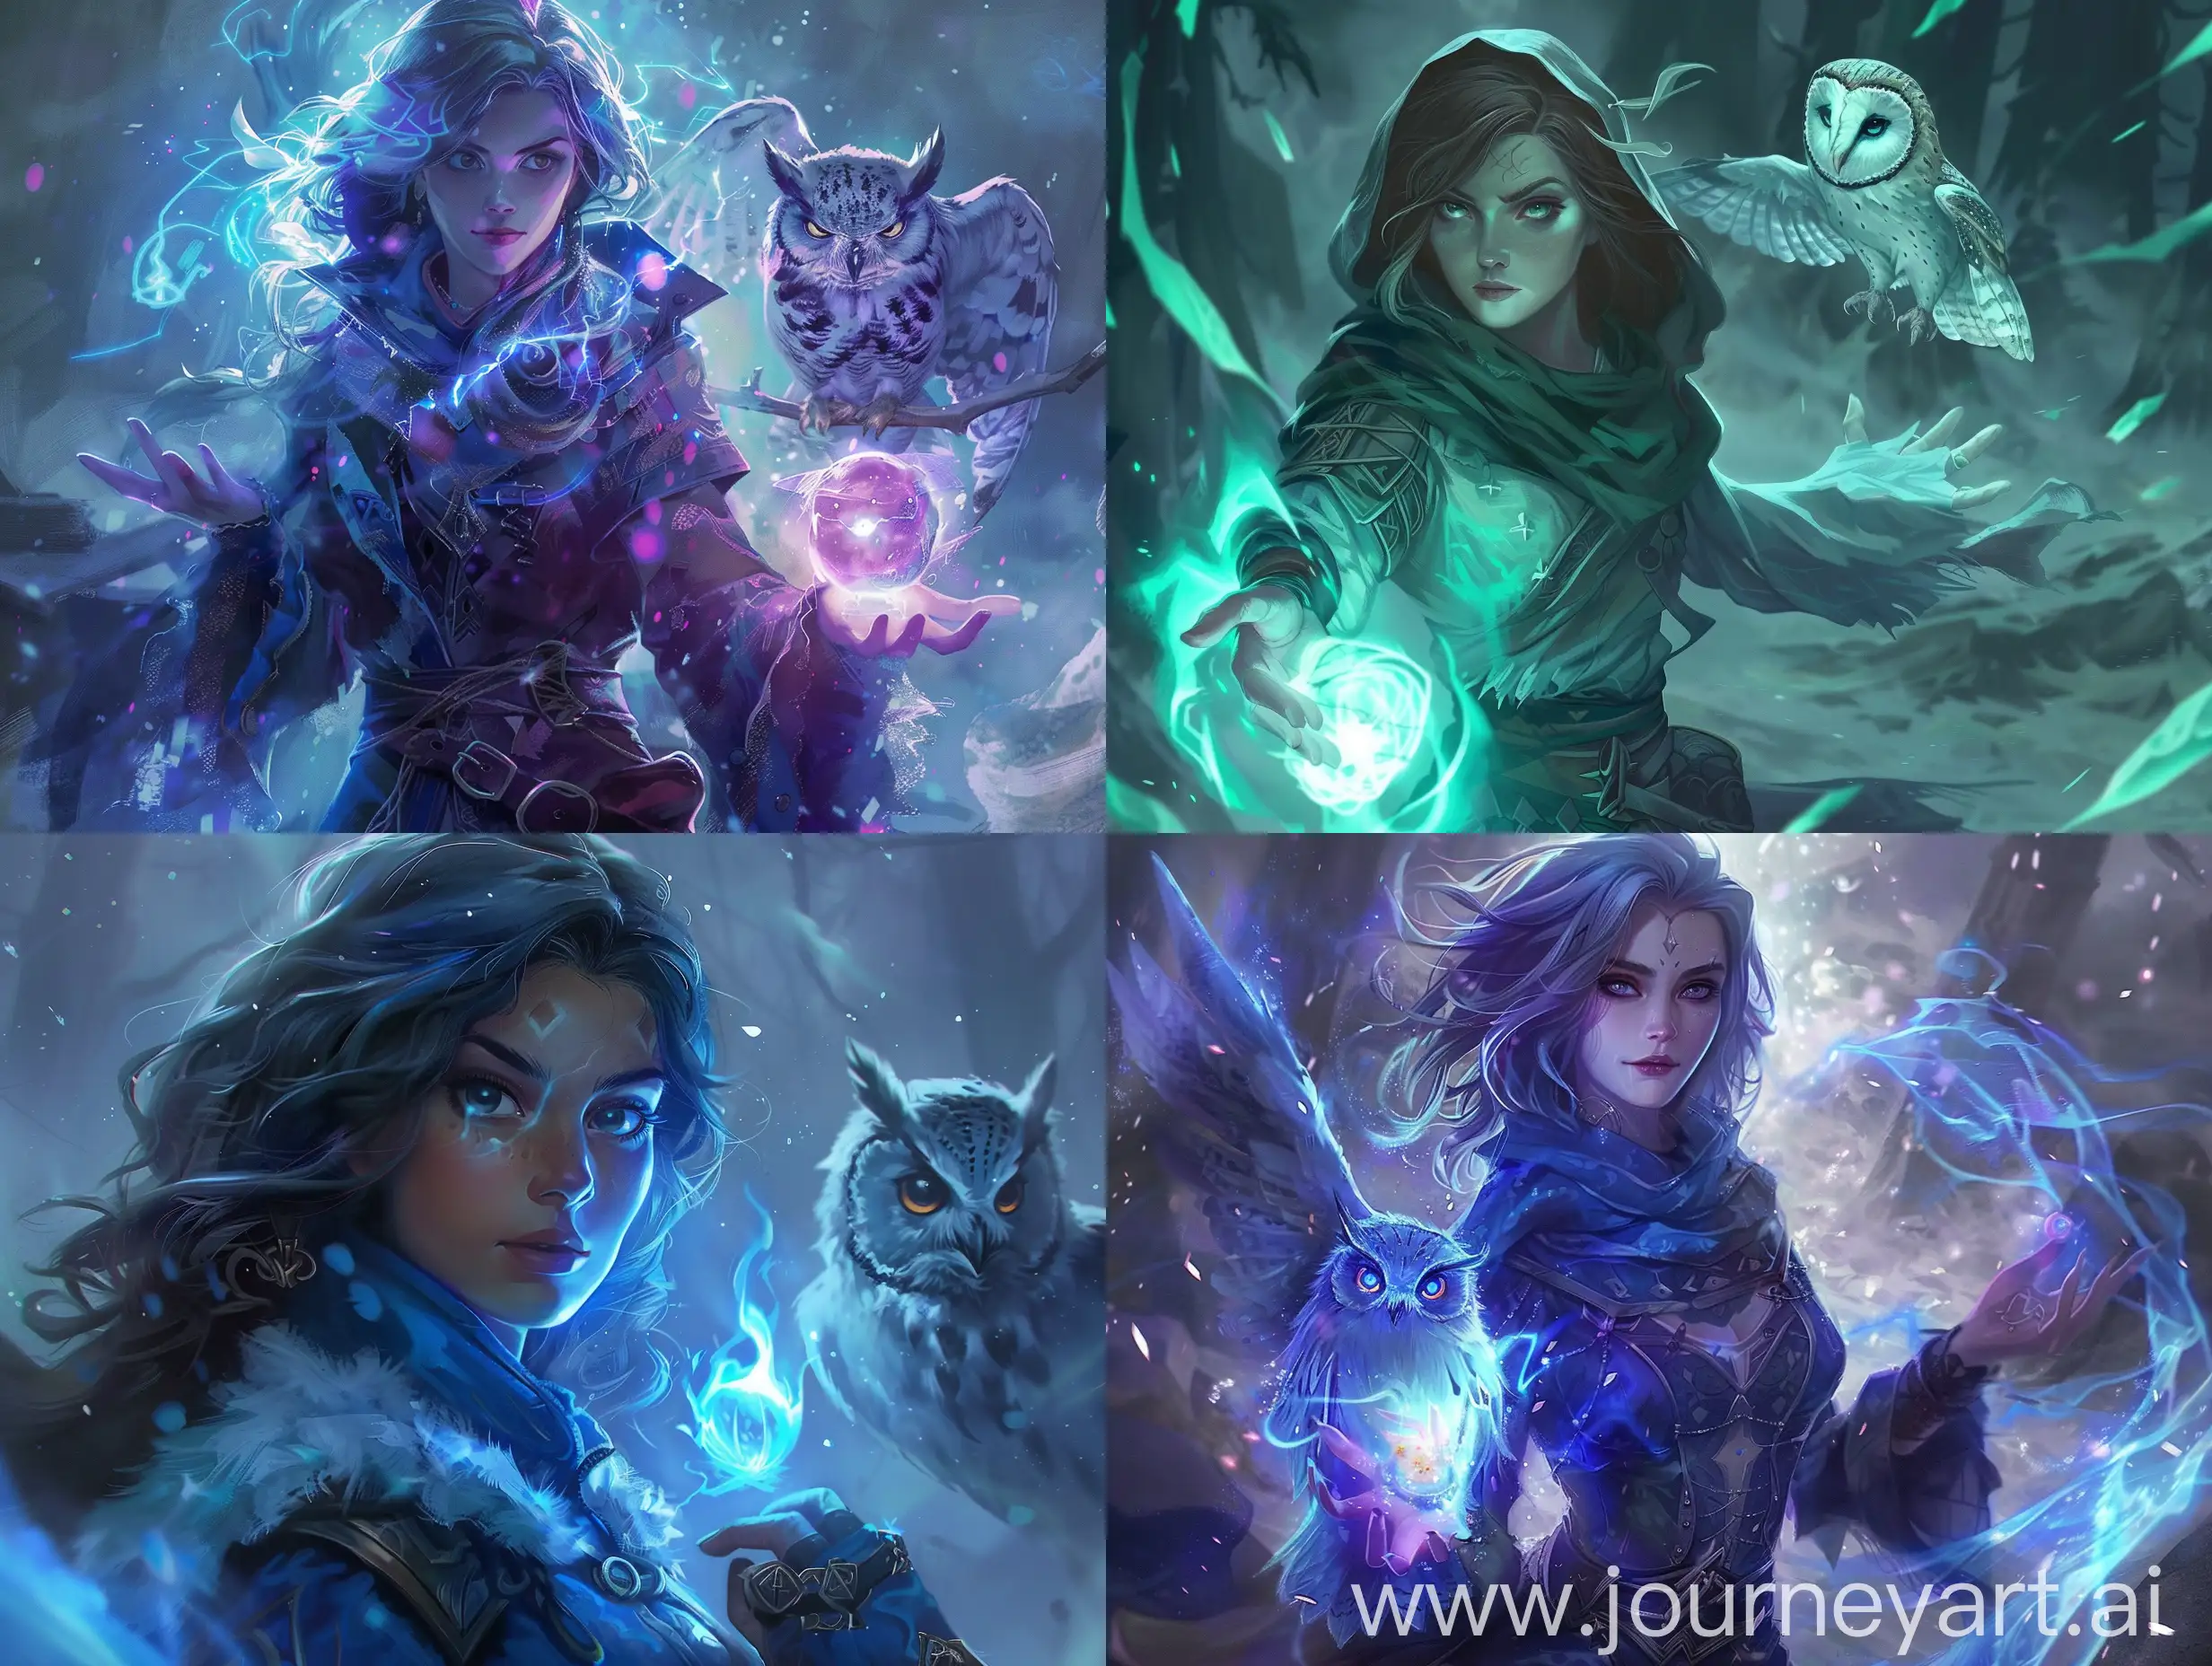 Mystical-Mage-Girl-Summoning-Glowing-Owl-in-League-of-Legends-Style-Art